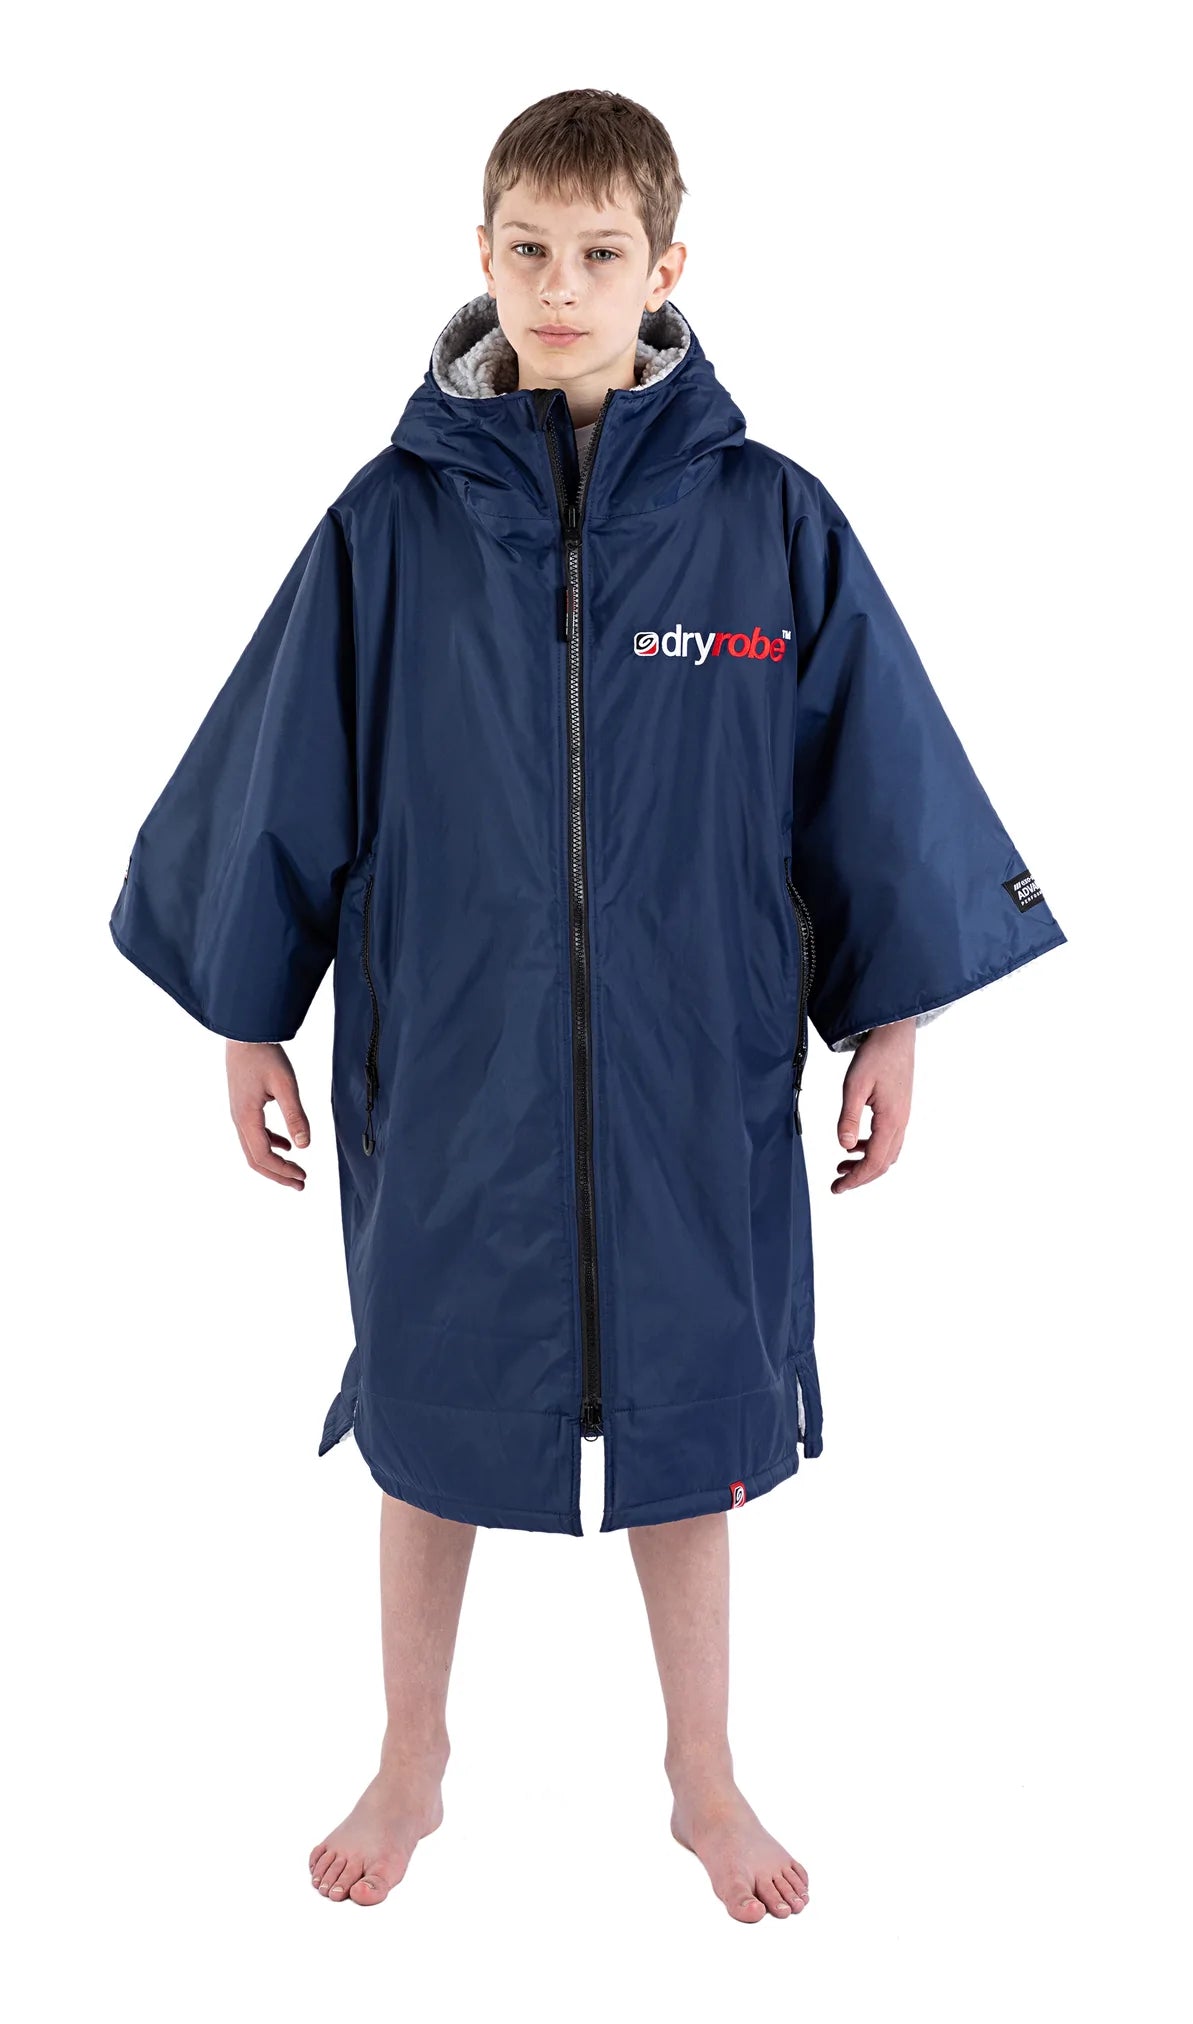 Dryrobe Advance Kids Short Sleeve - Available instore only.